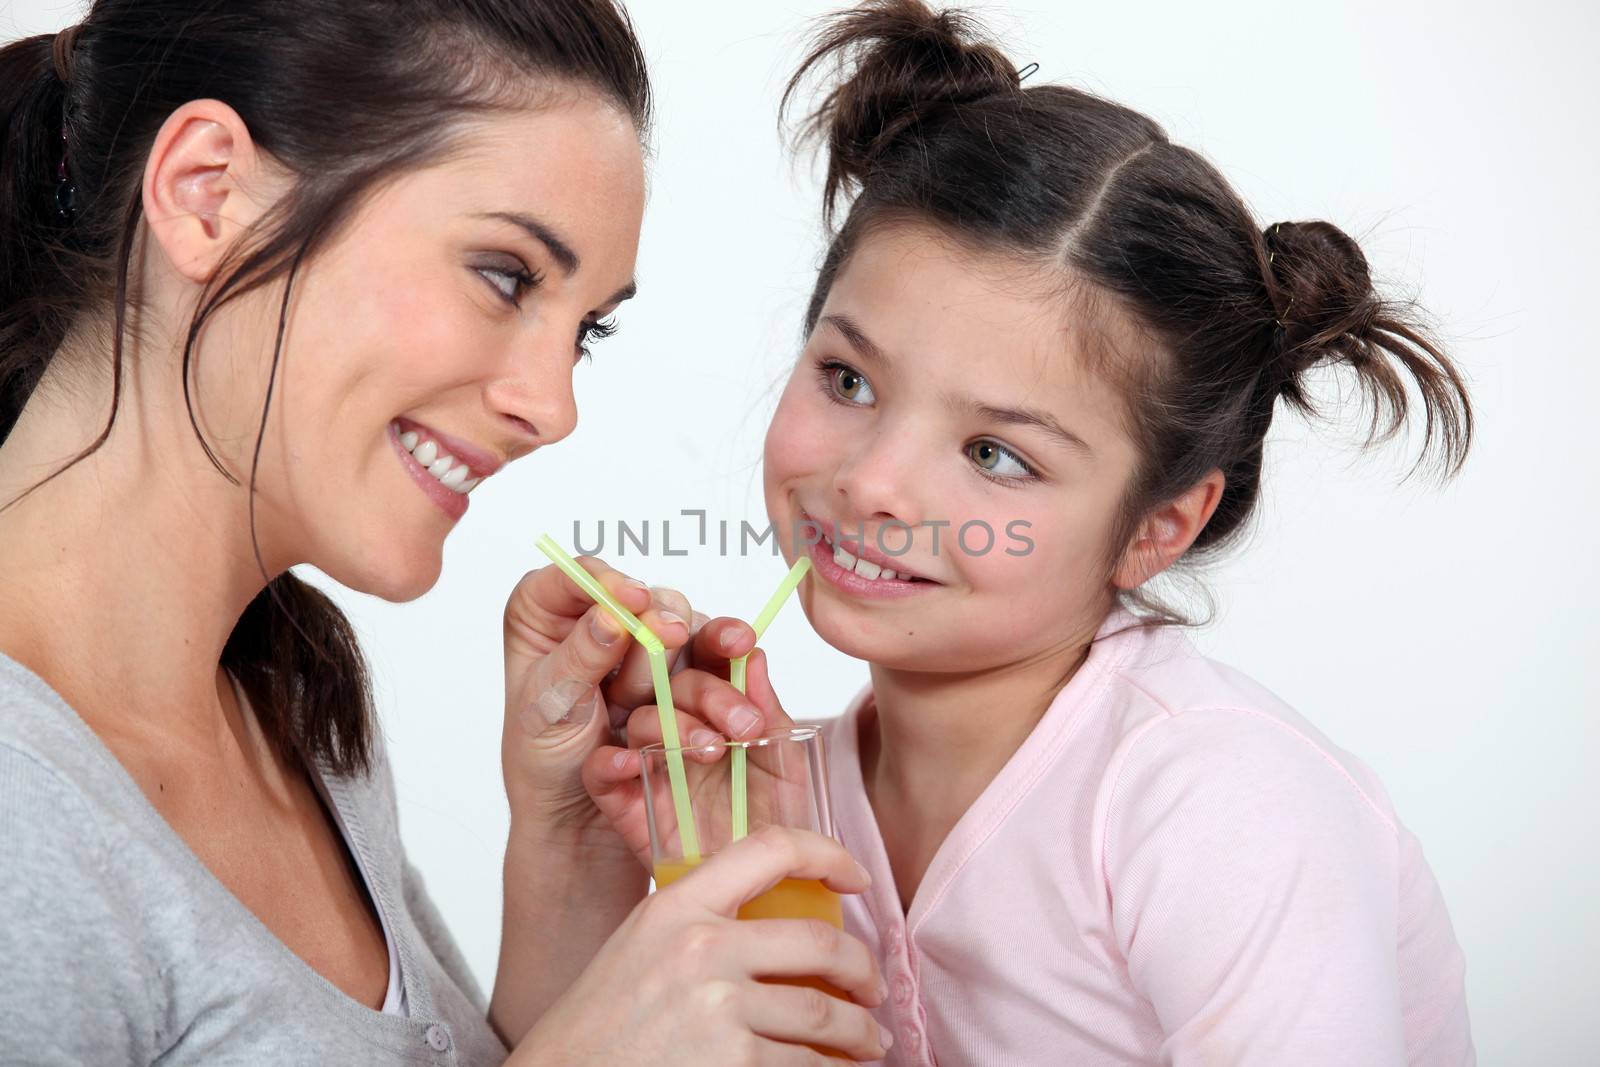 Woman sharing a glass of juice with her little sister by phovoir